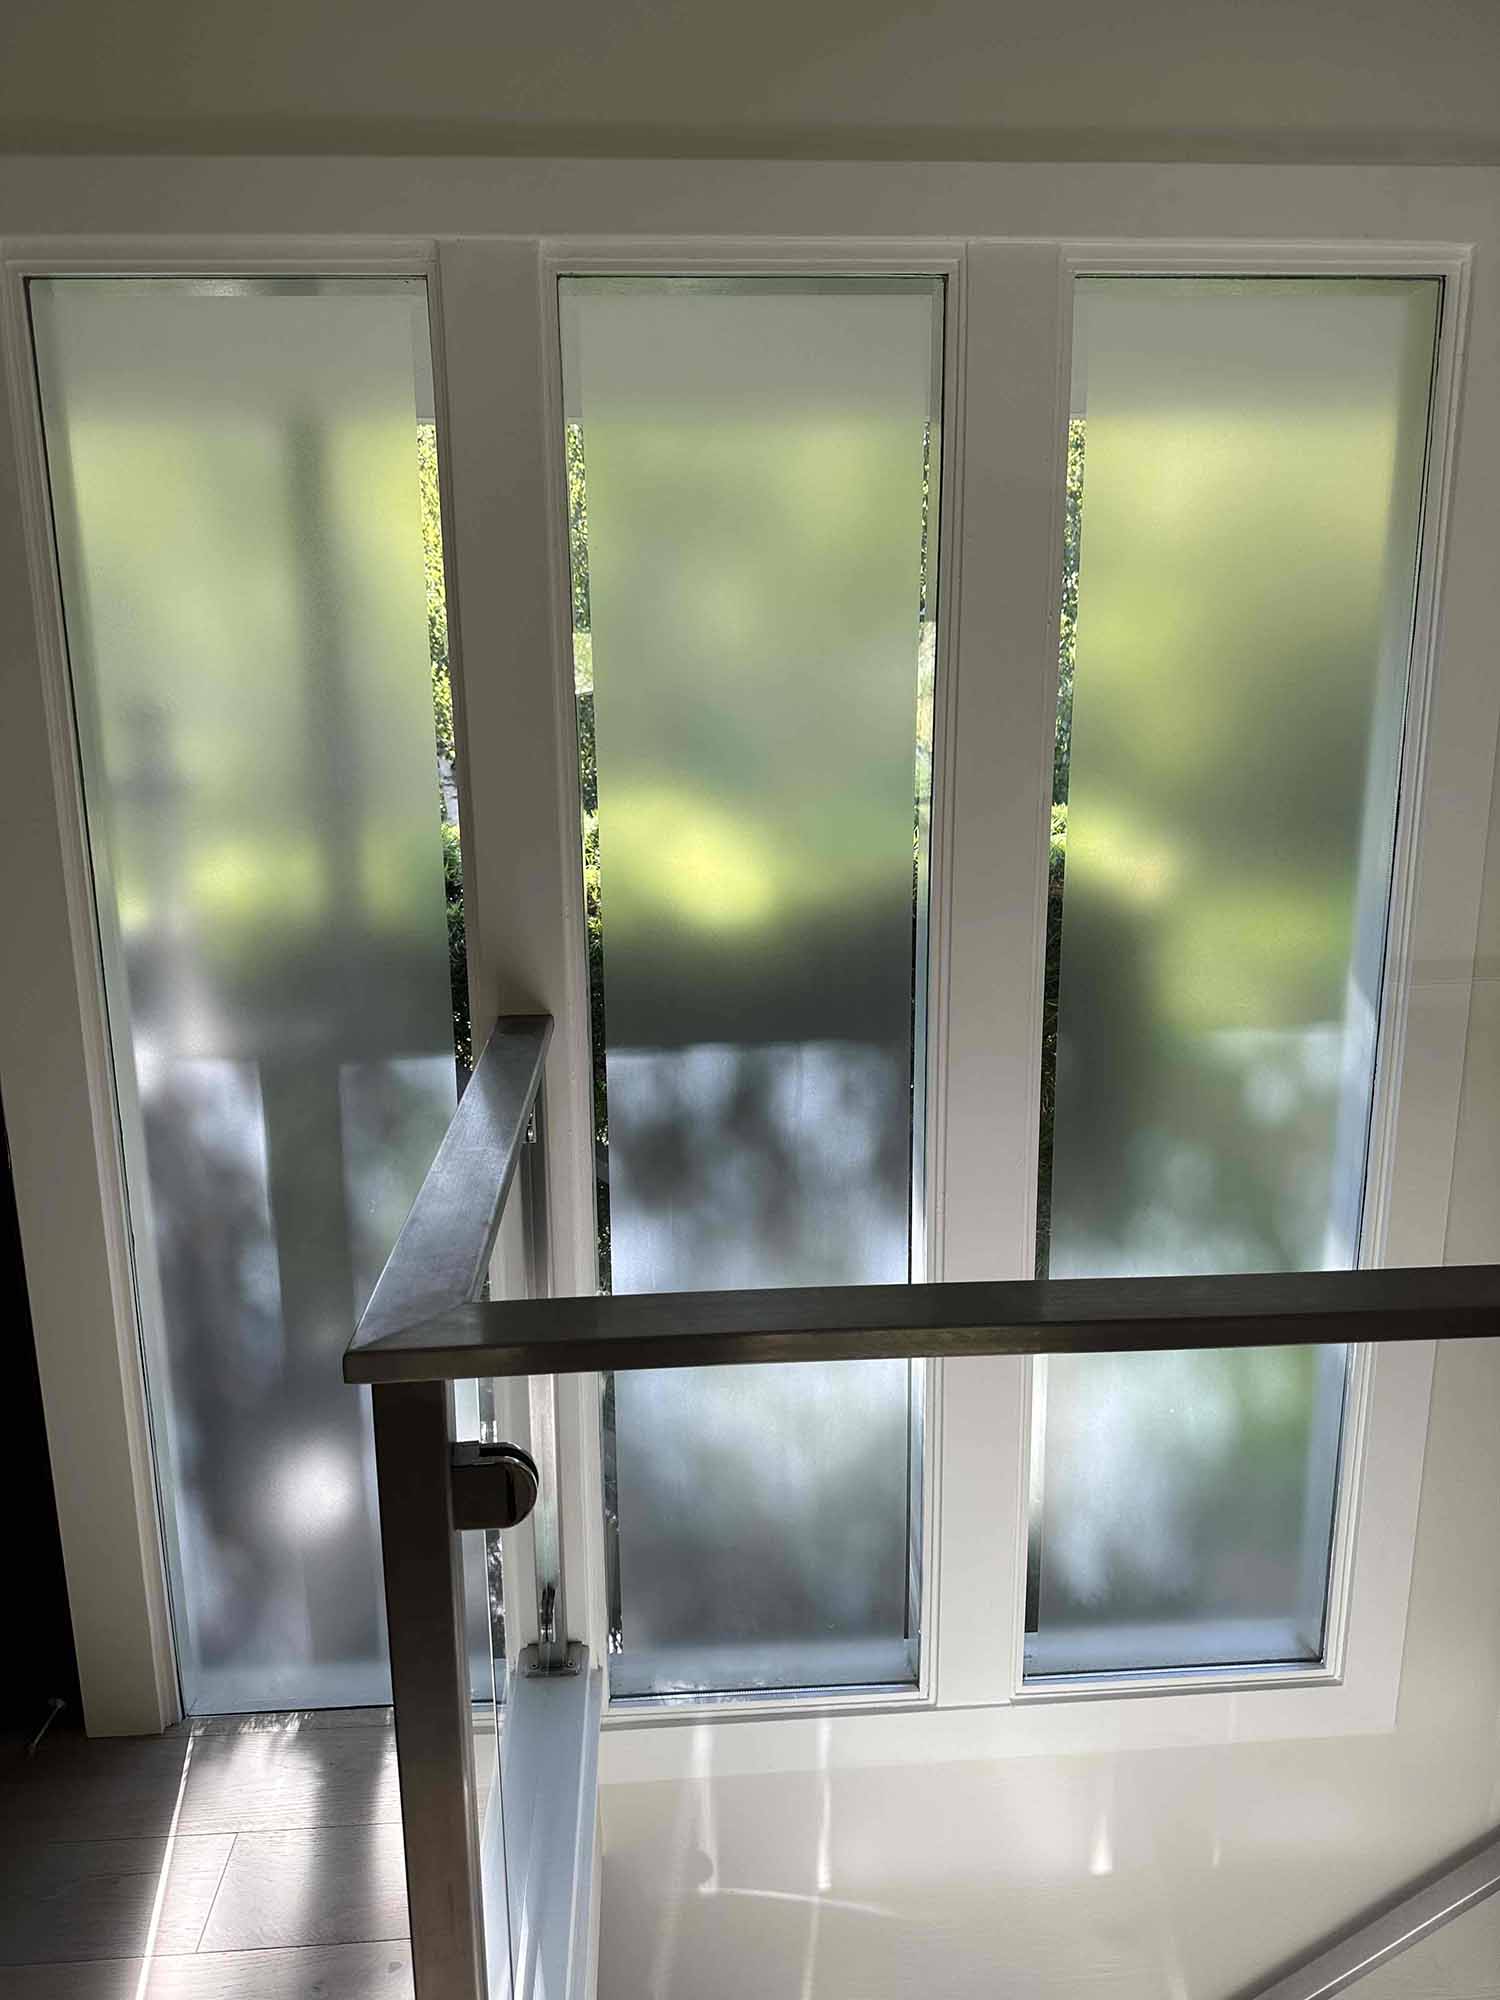 Using Frosted Window Film at Home in Greenbrae, CA. Installed by ClimatePro.